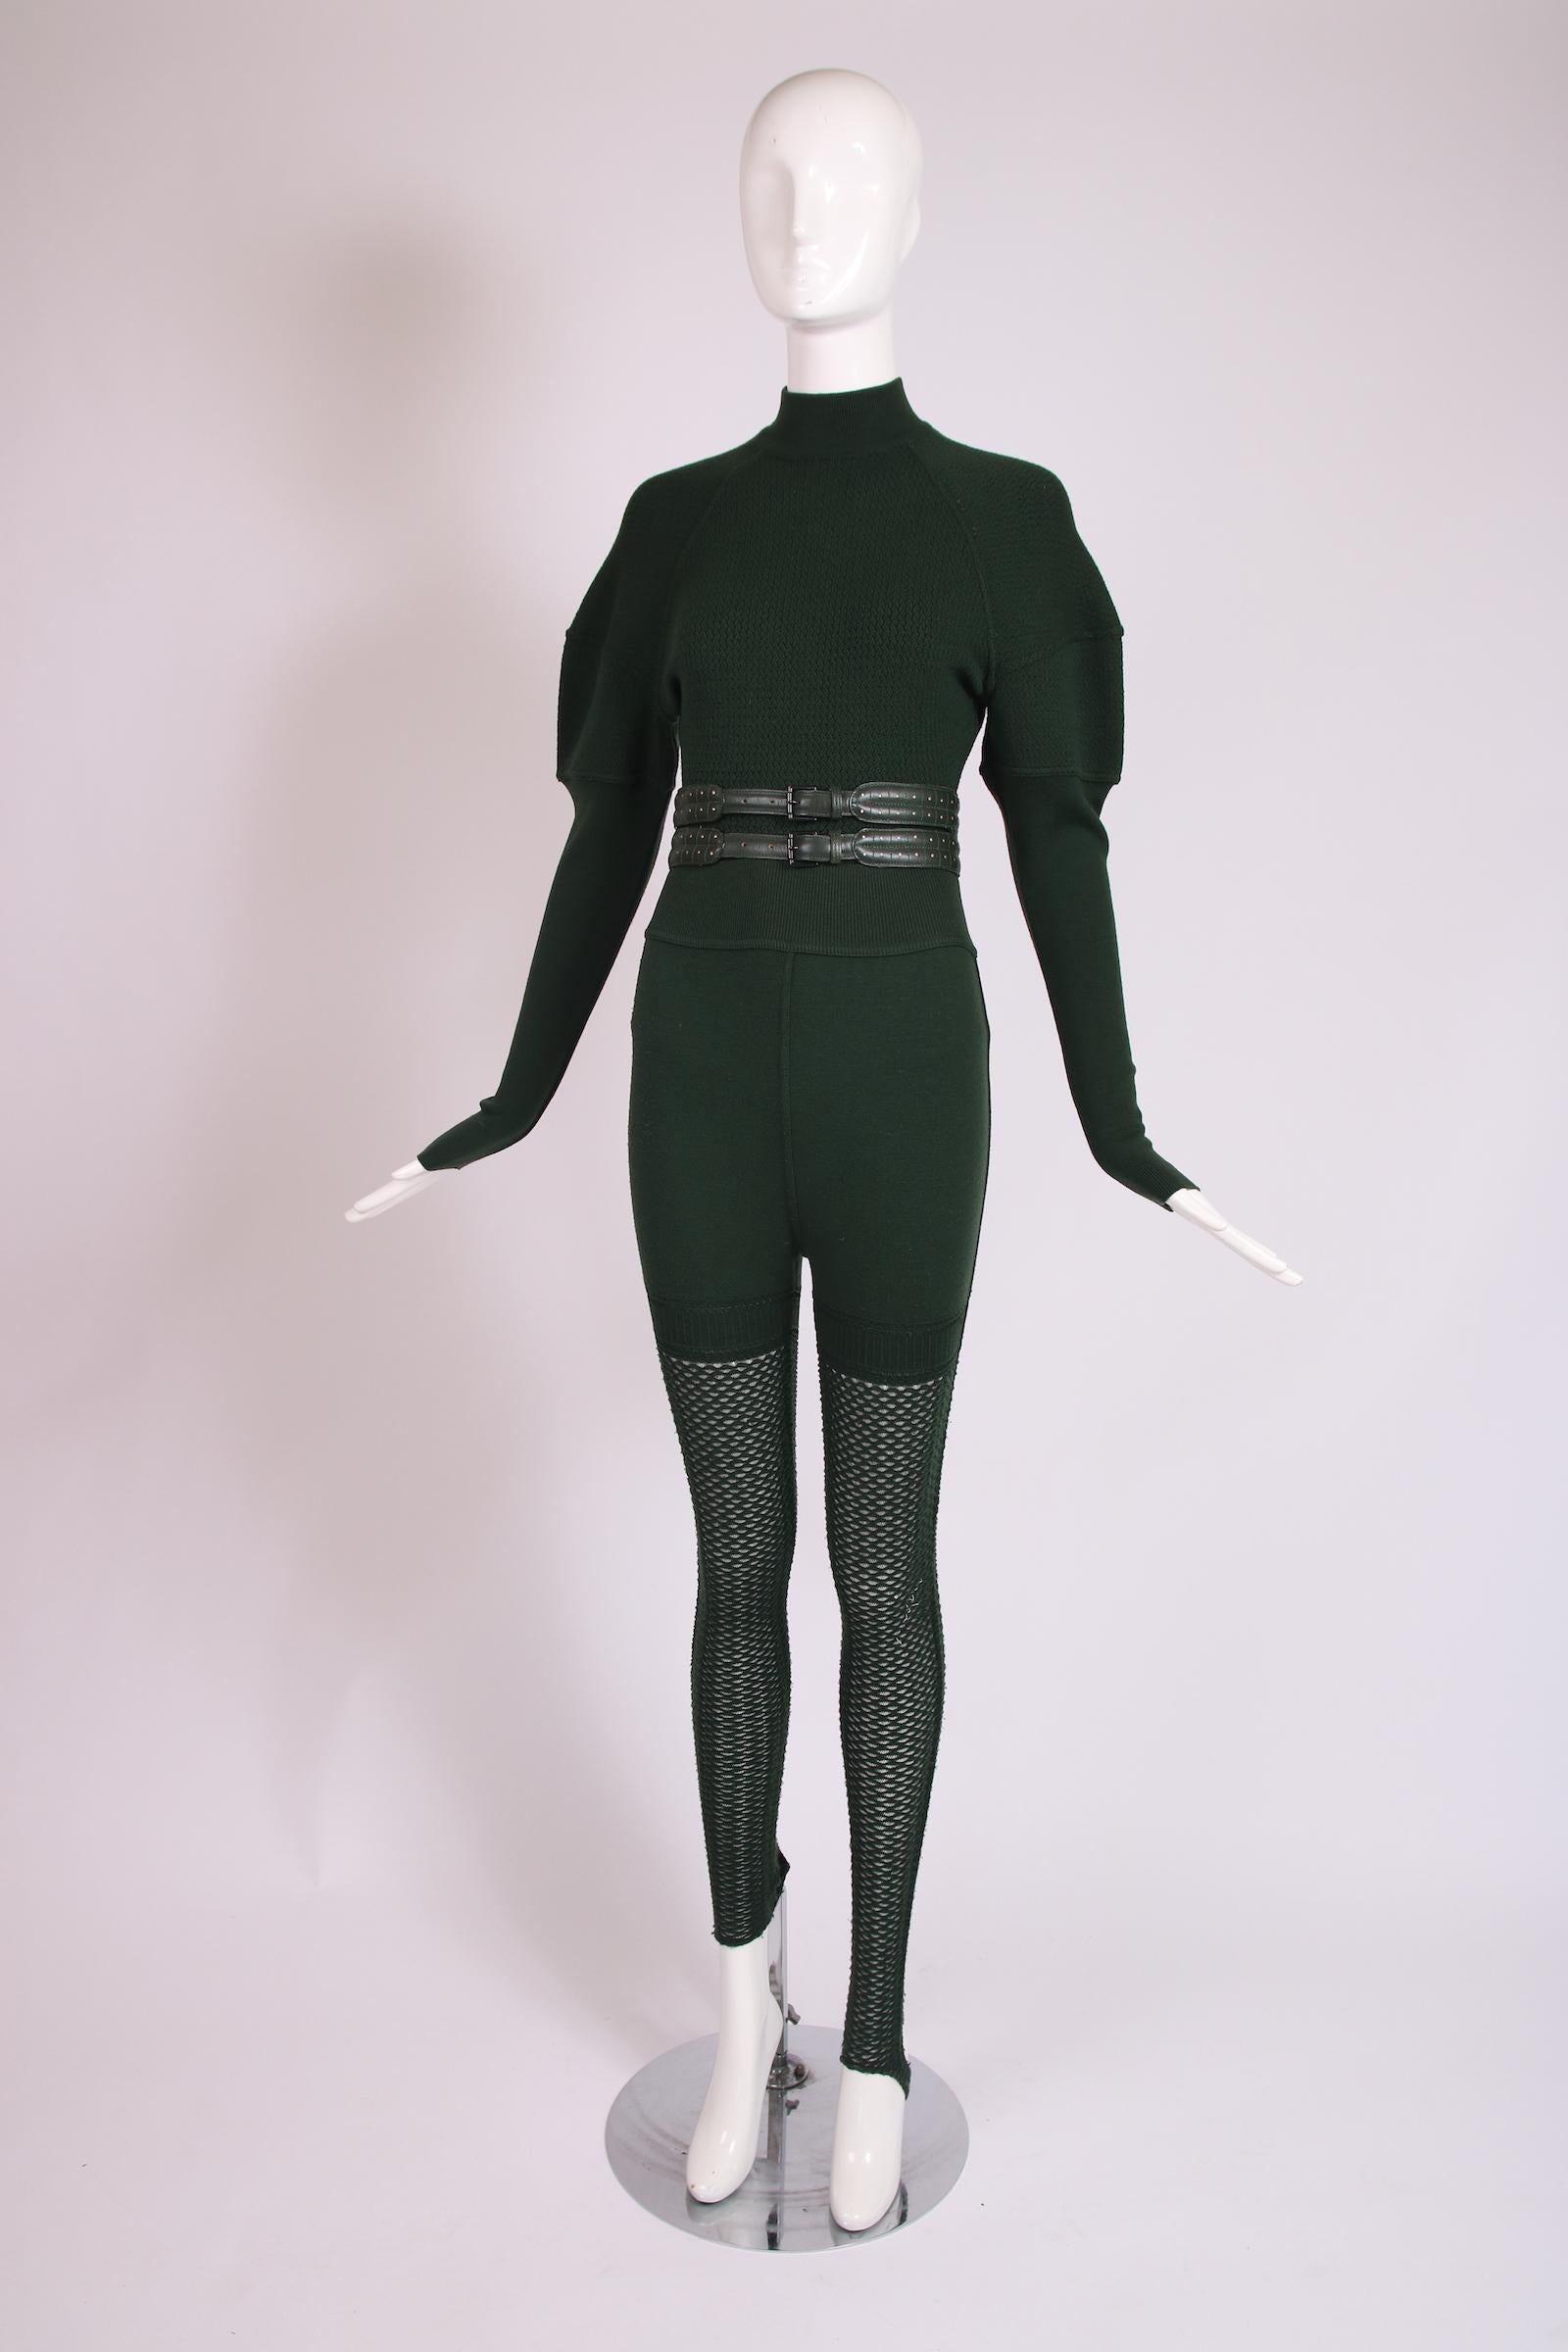 Early 1990's Alaia green stretch wool and rayon blend body suit, stirrup legging and belt ensemble. The body suit combines wool with two distinct weaves and has a mock turtleneck, subtle mutton sleeves and fastens at the crotch with snap closures.